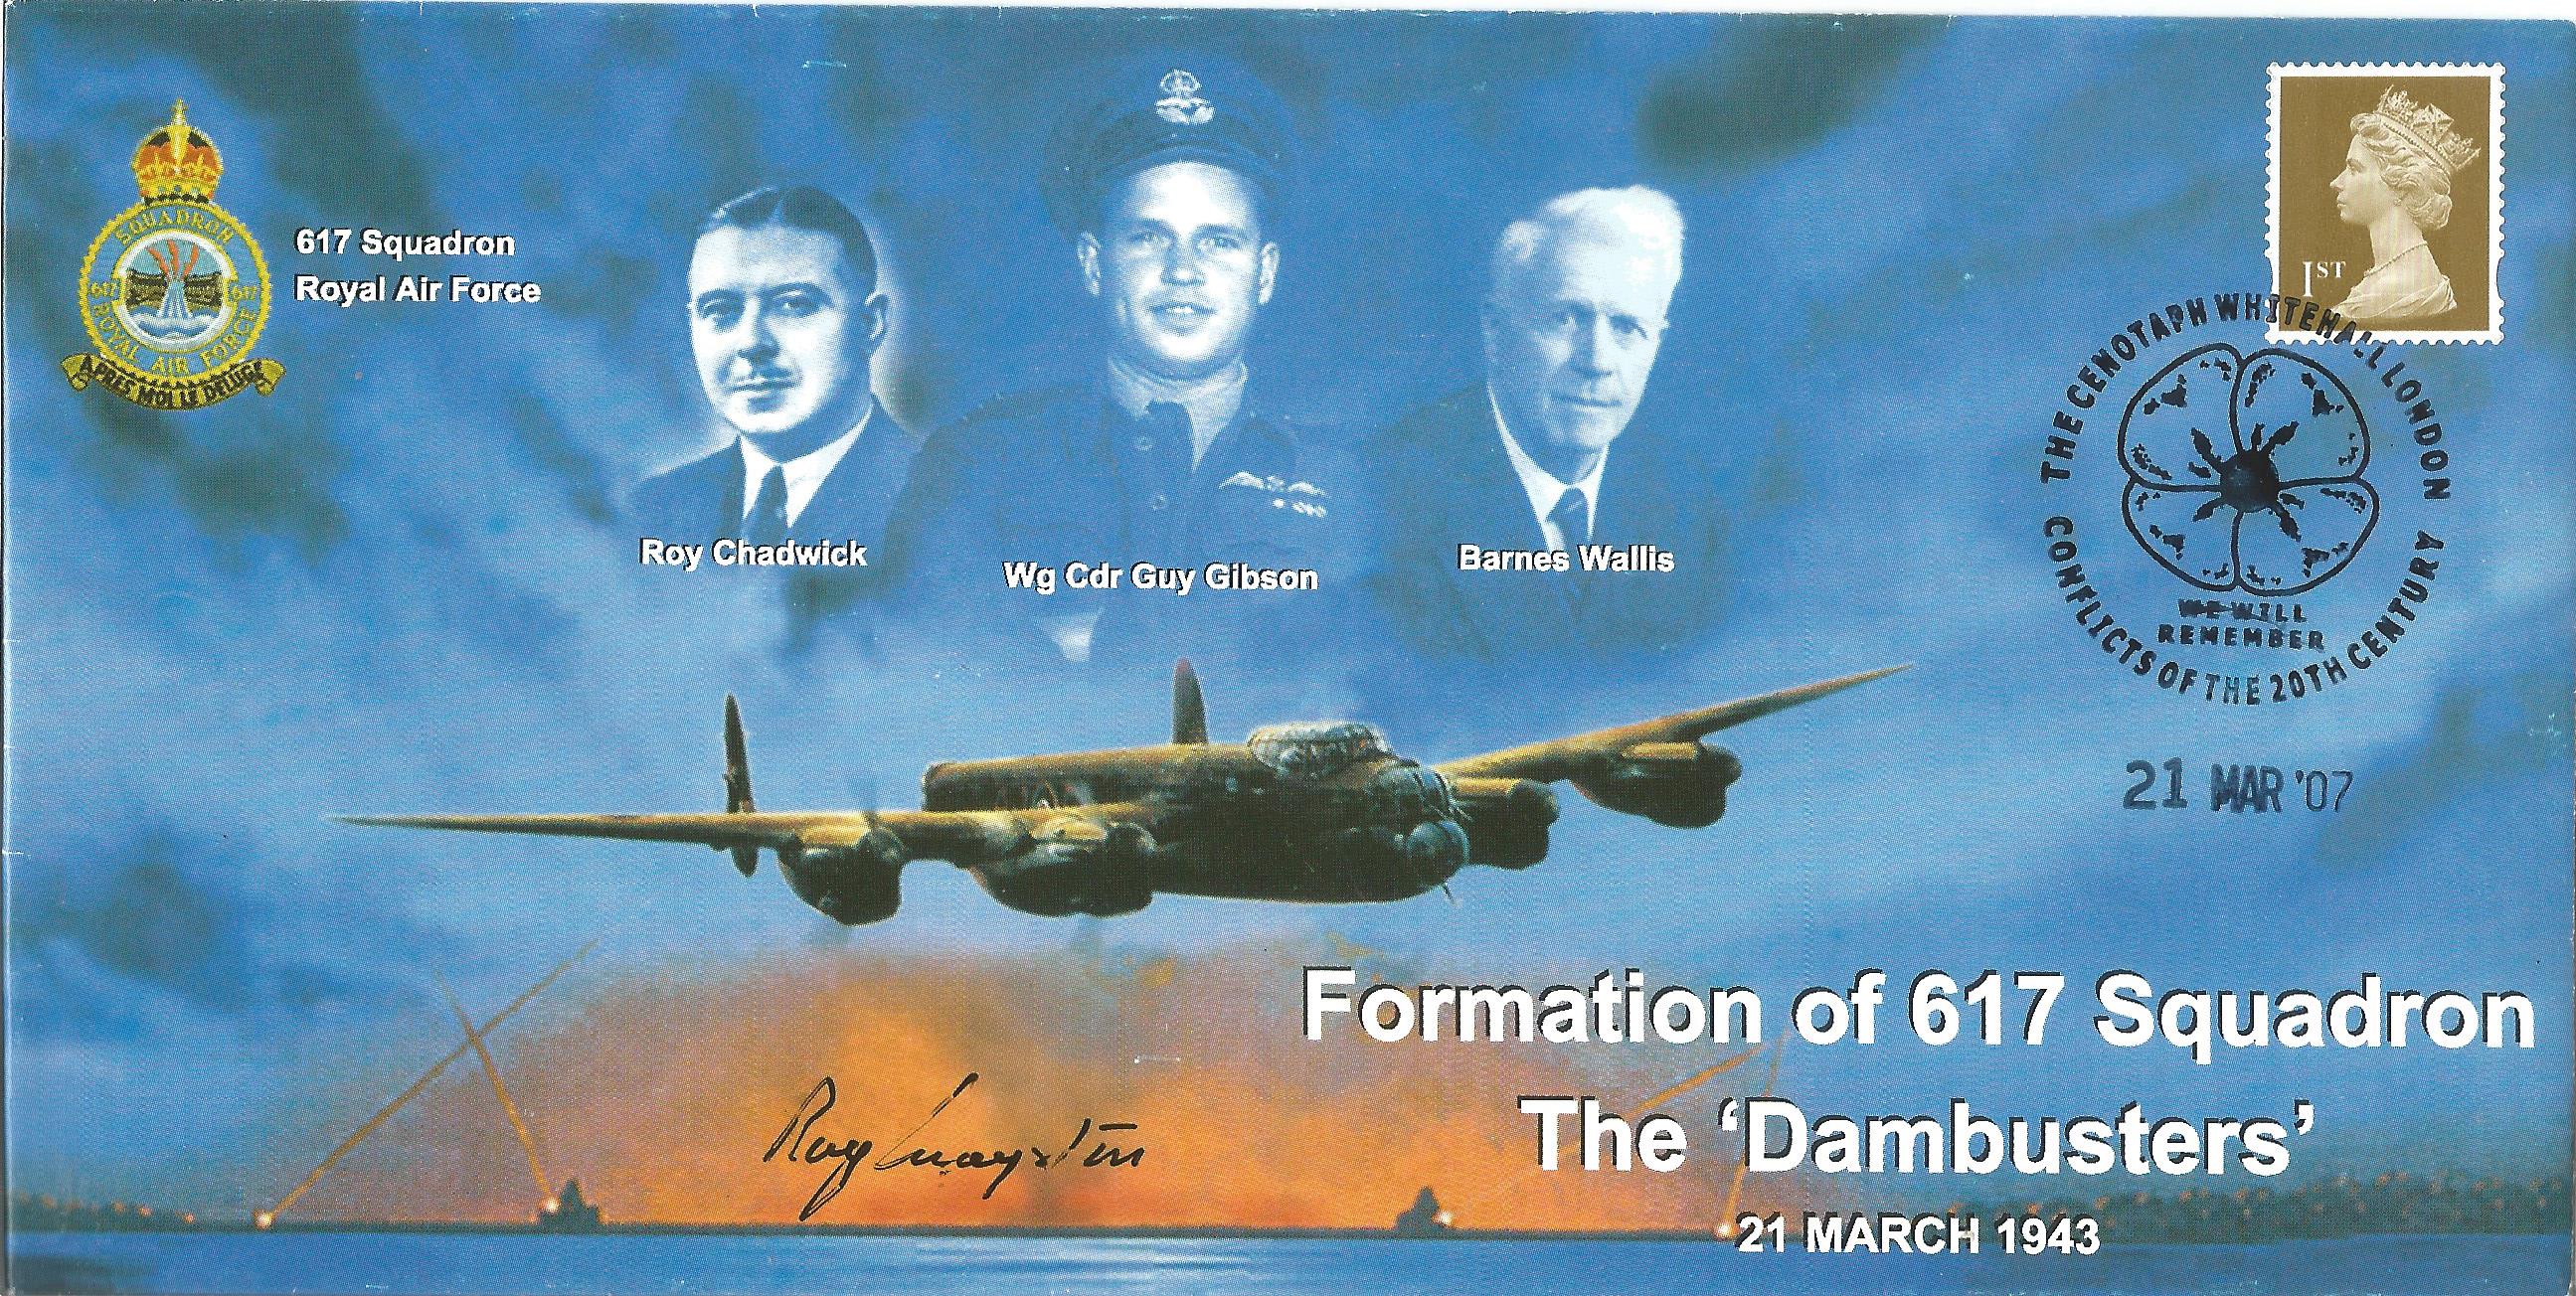 Dambusters Fl Off. Raymond Grayston signed Formation of 617 Squadron The Dambusters, 21st March